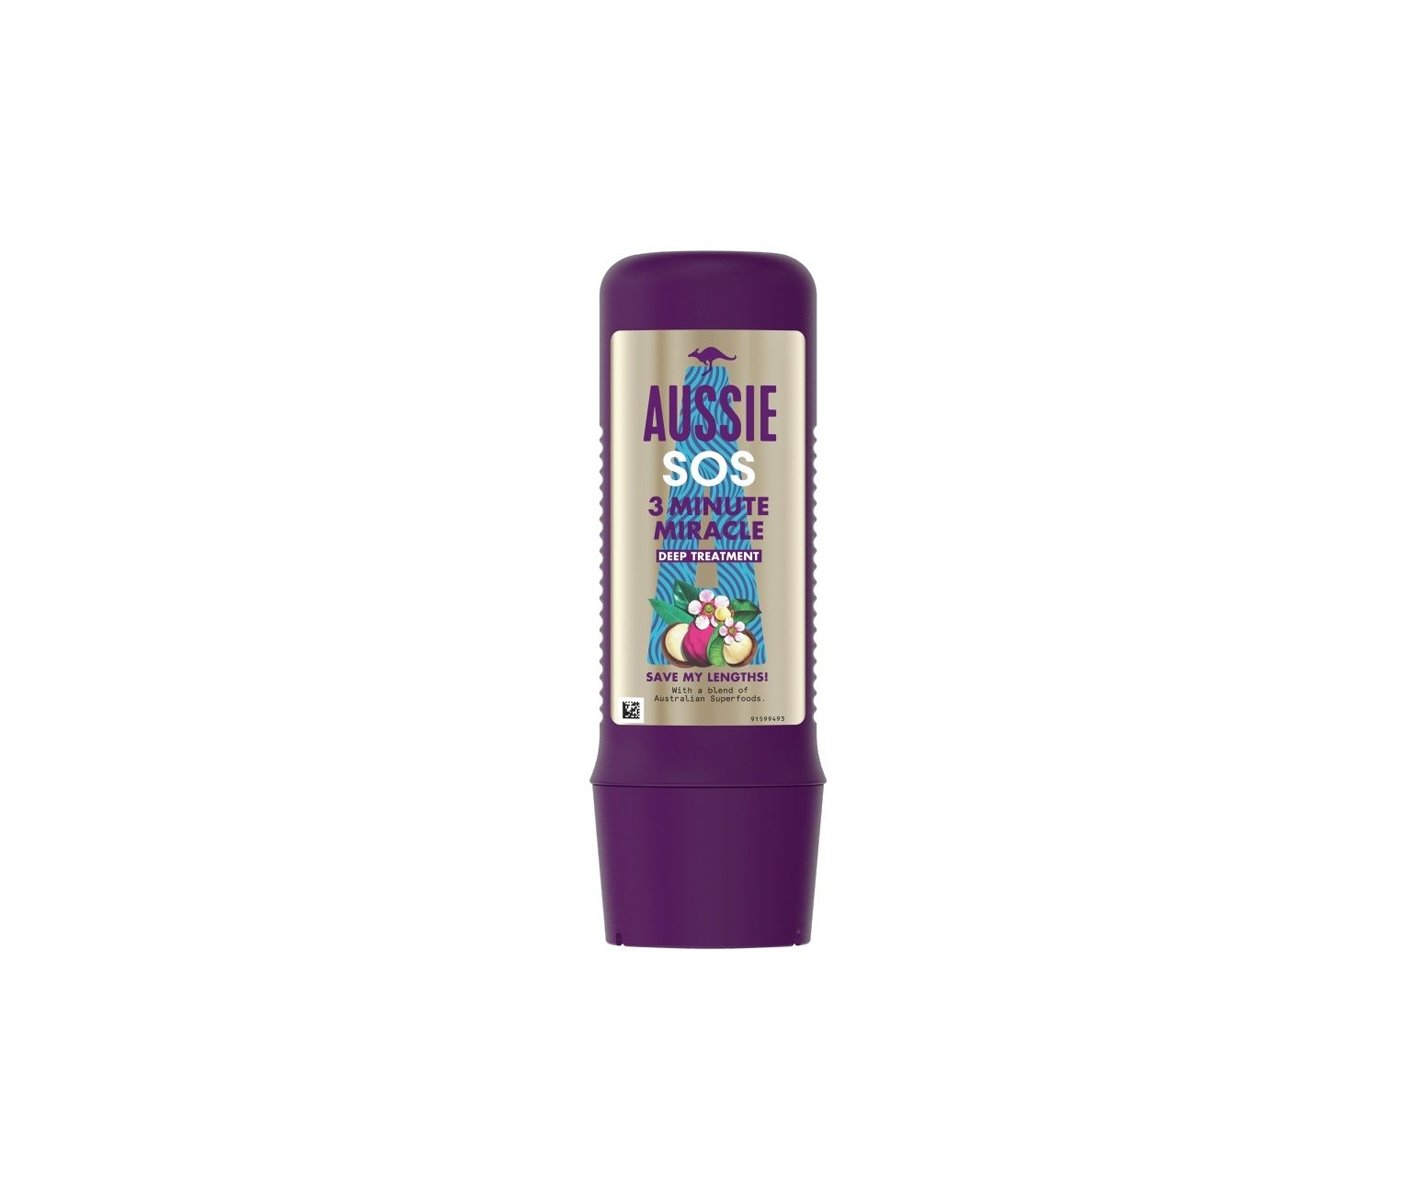 Aussie, SOS 3 Minute Miracle, Instant hair conditioner